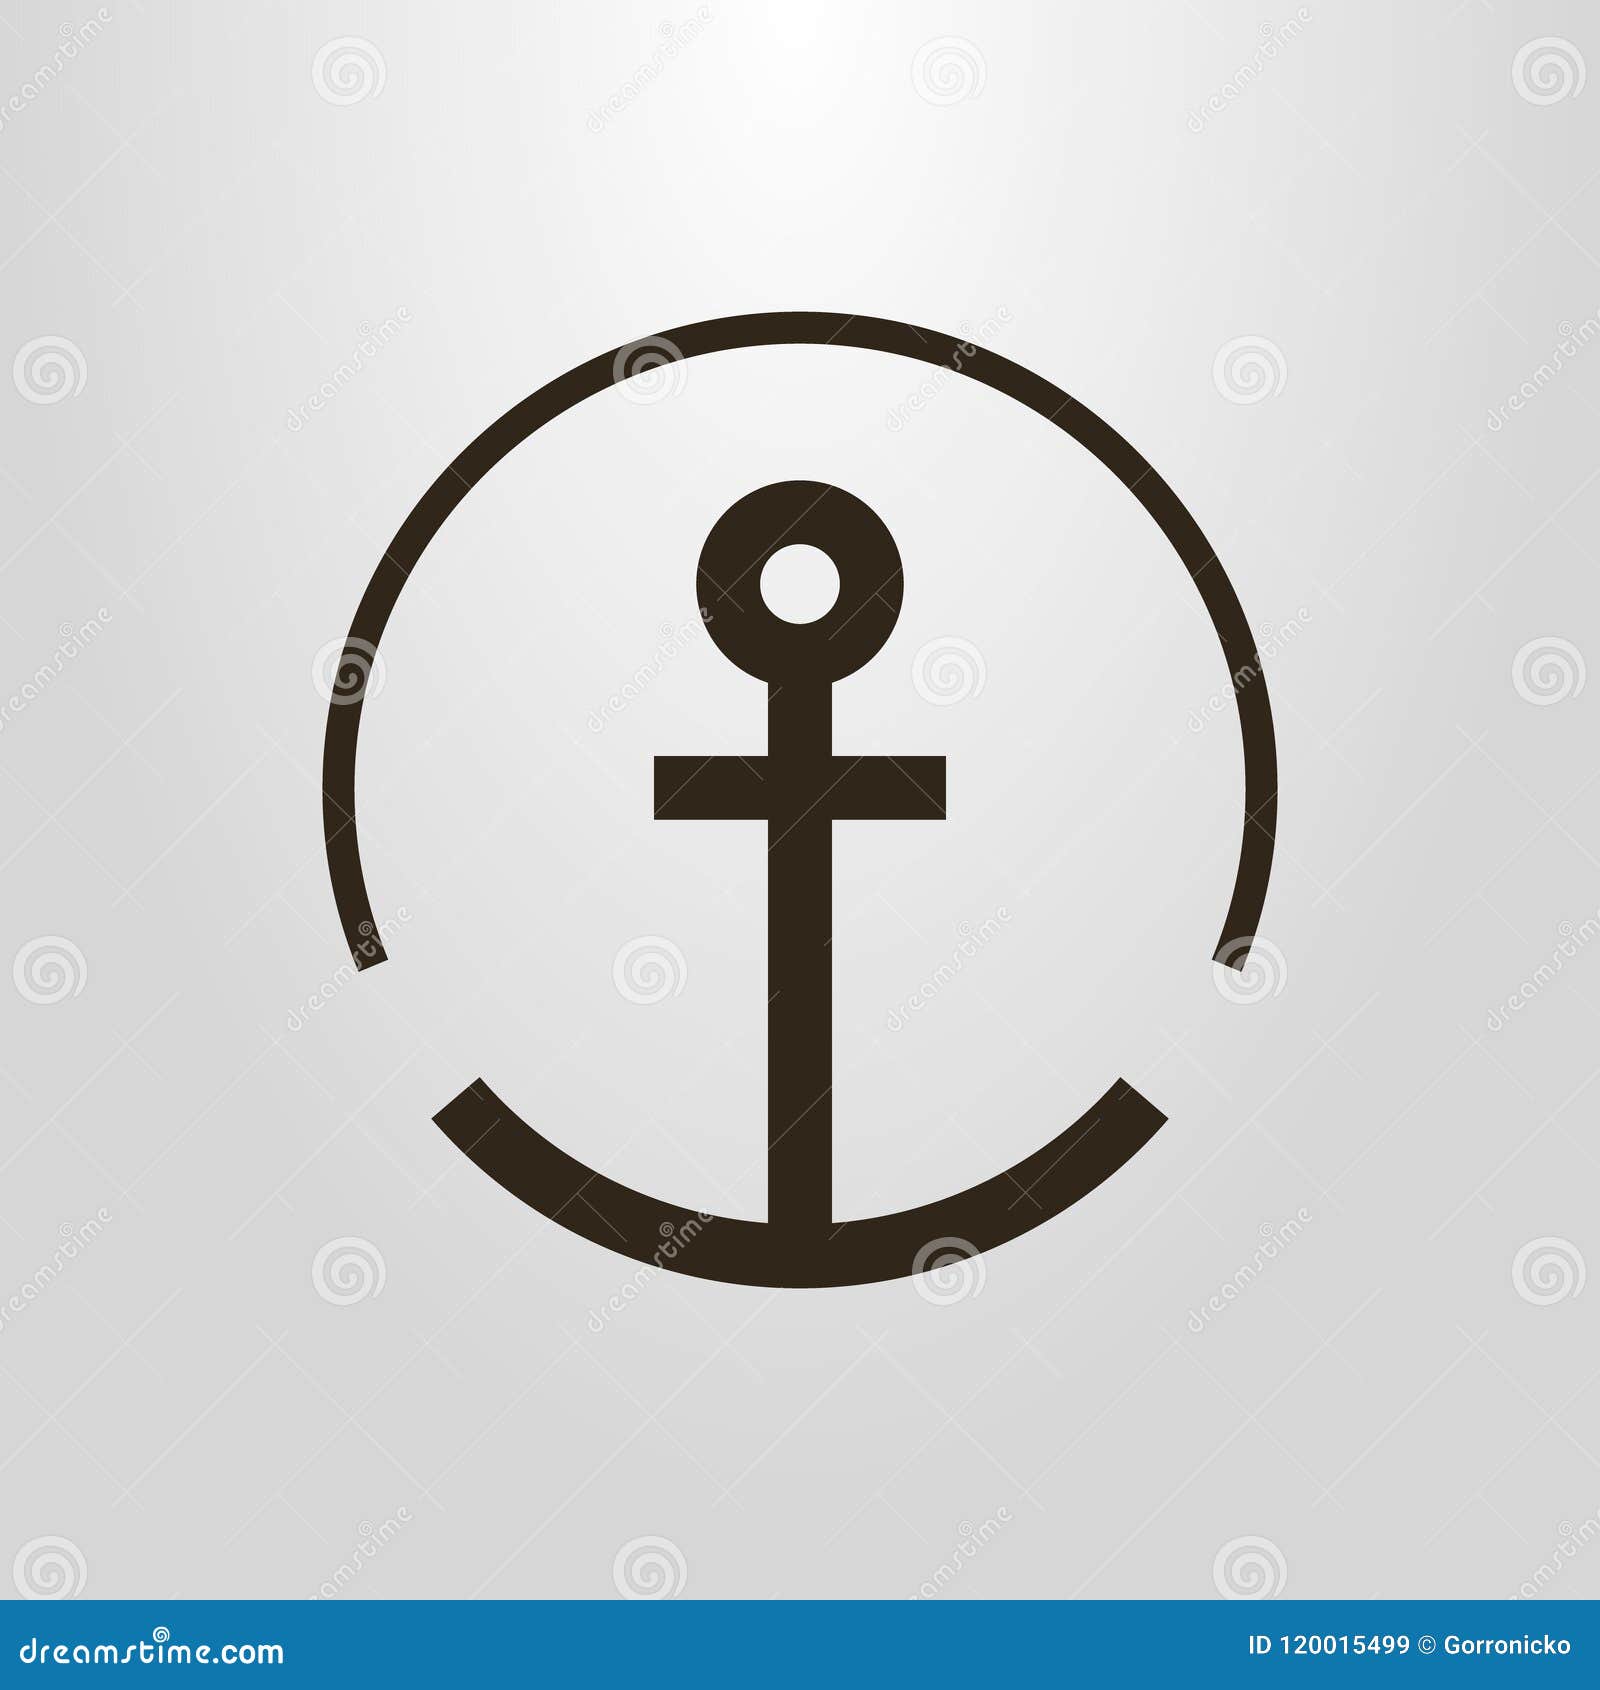 Simple Vector Line Art Round Pictogram of an Anchor Stock Vector